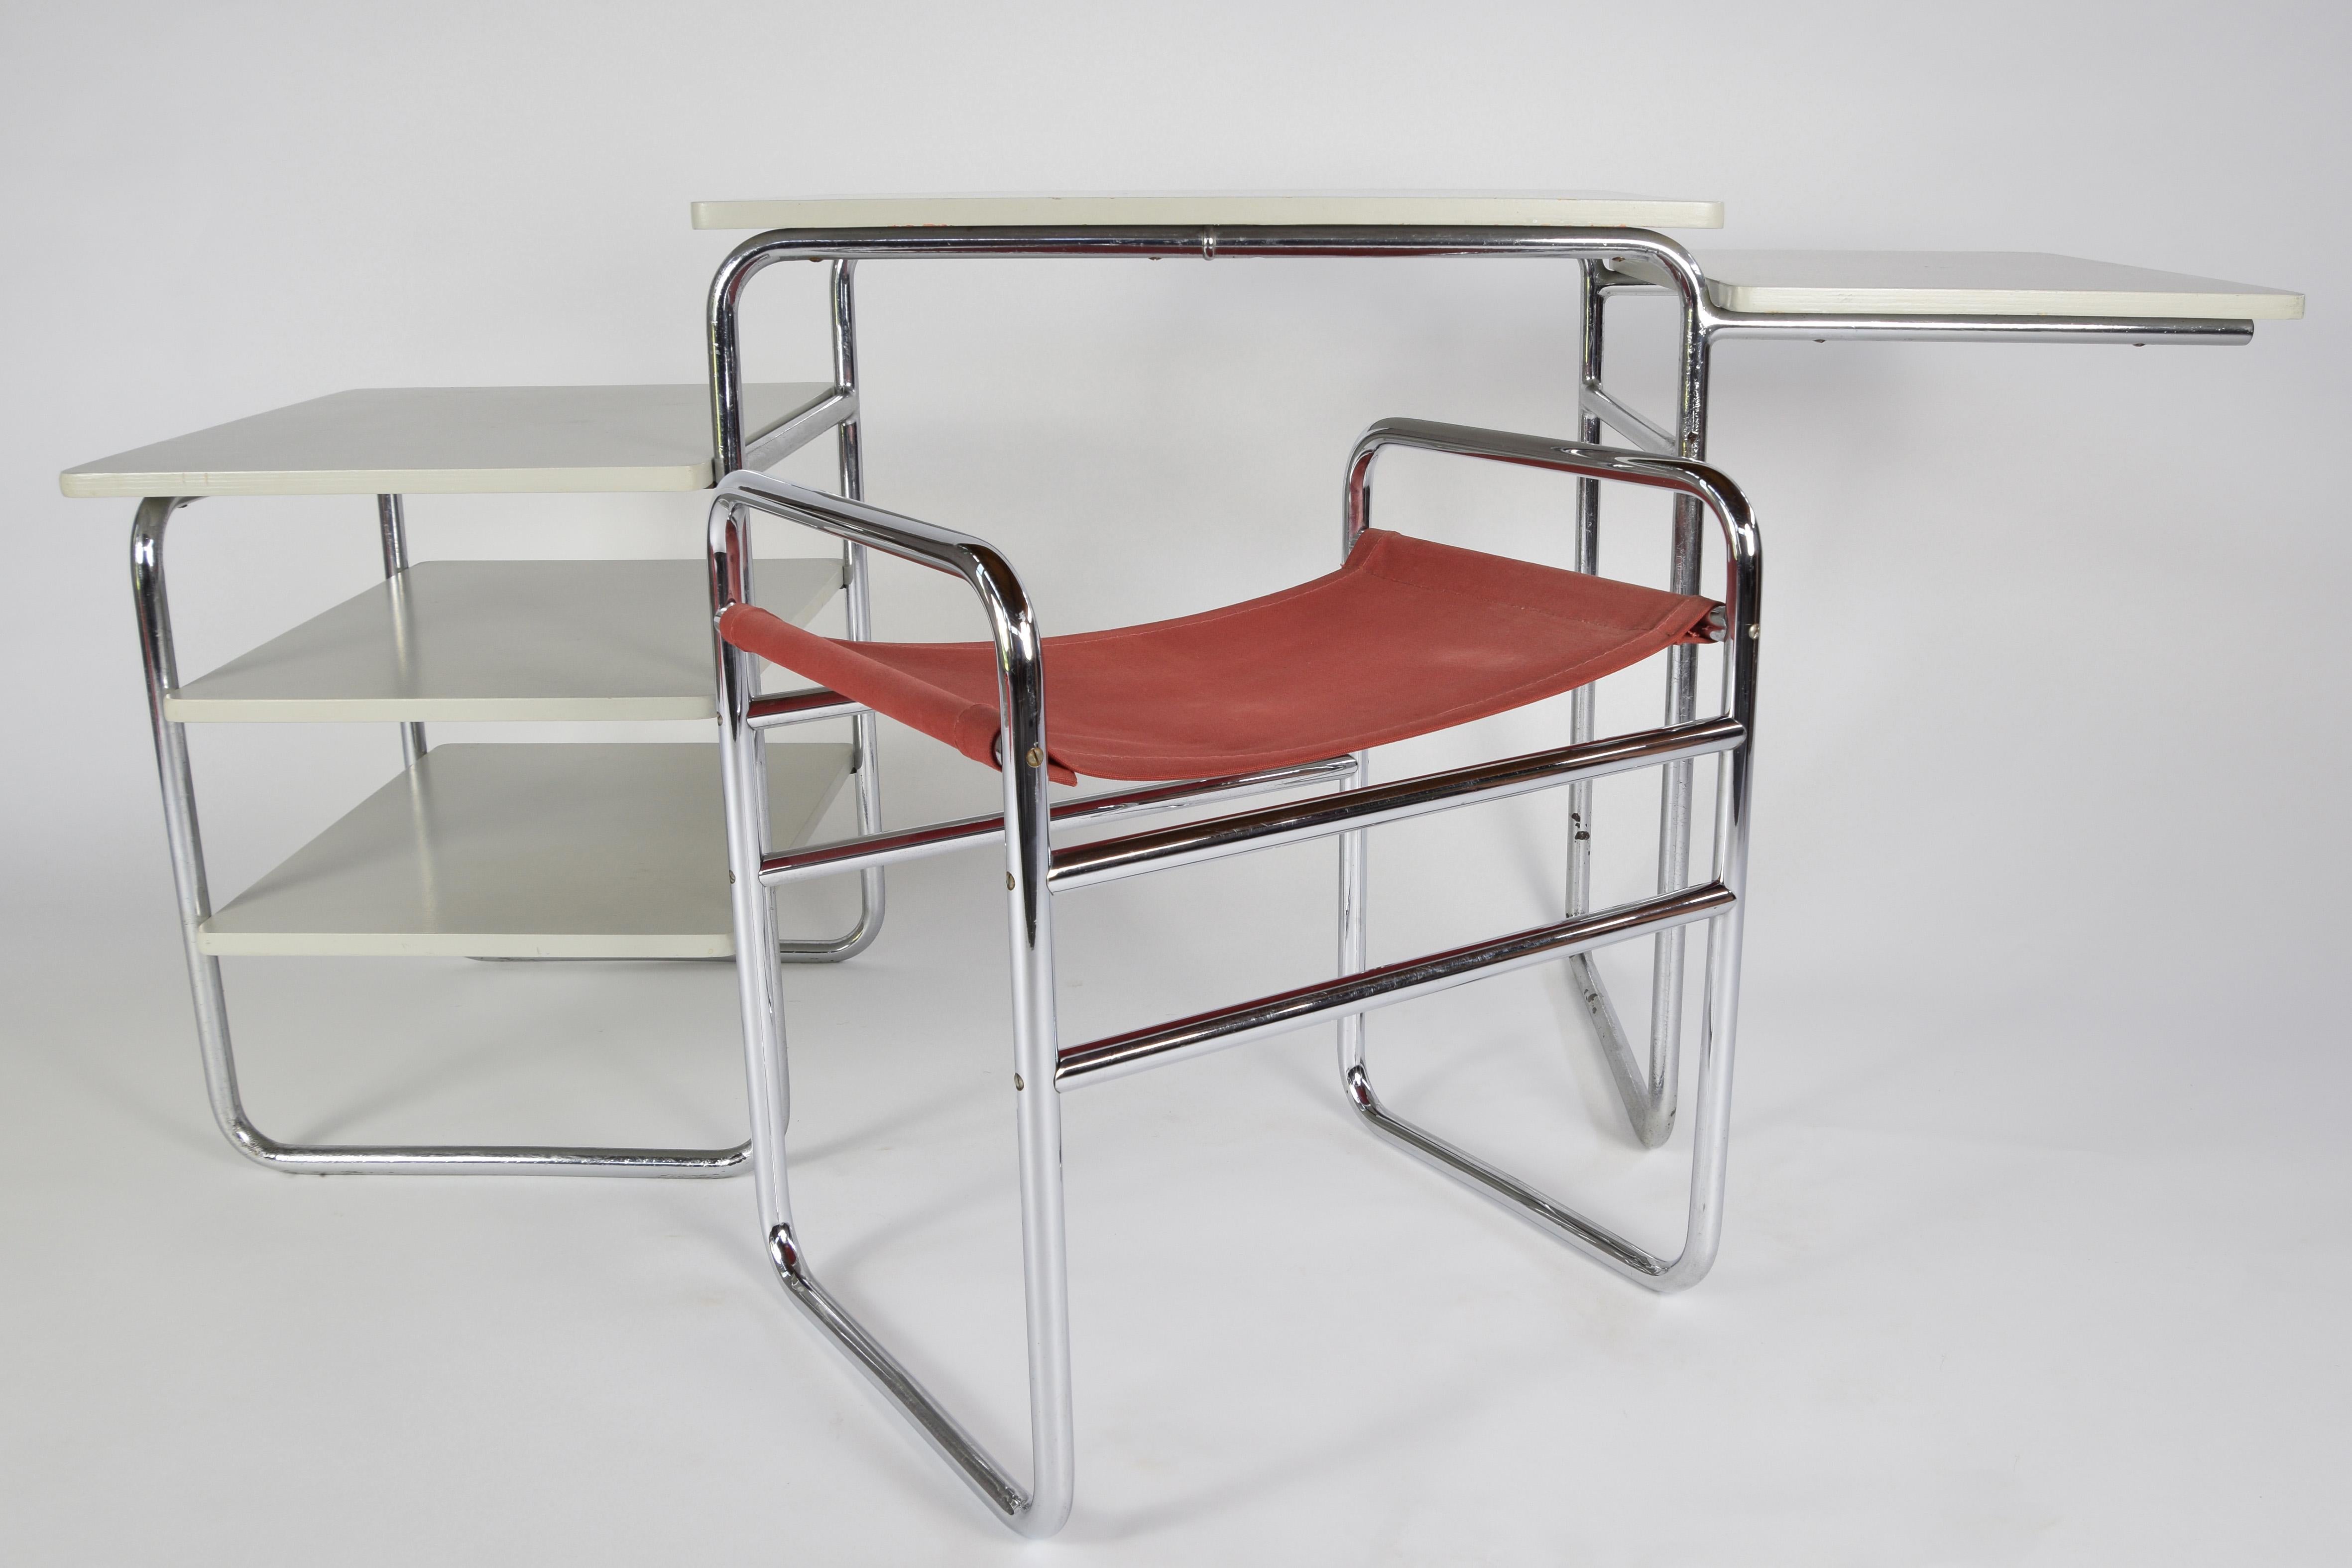 Dutch Bauhaus style Desk made for Auping, The Netherlands